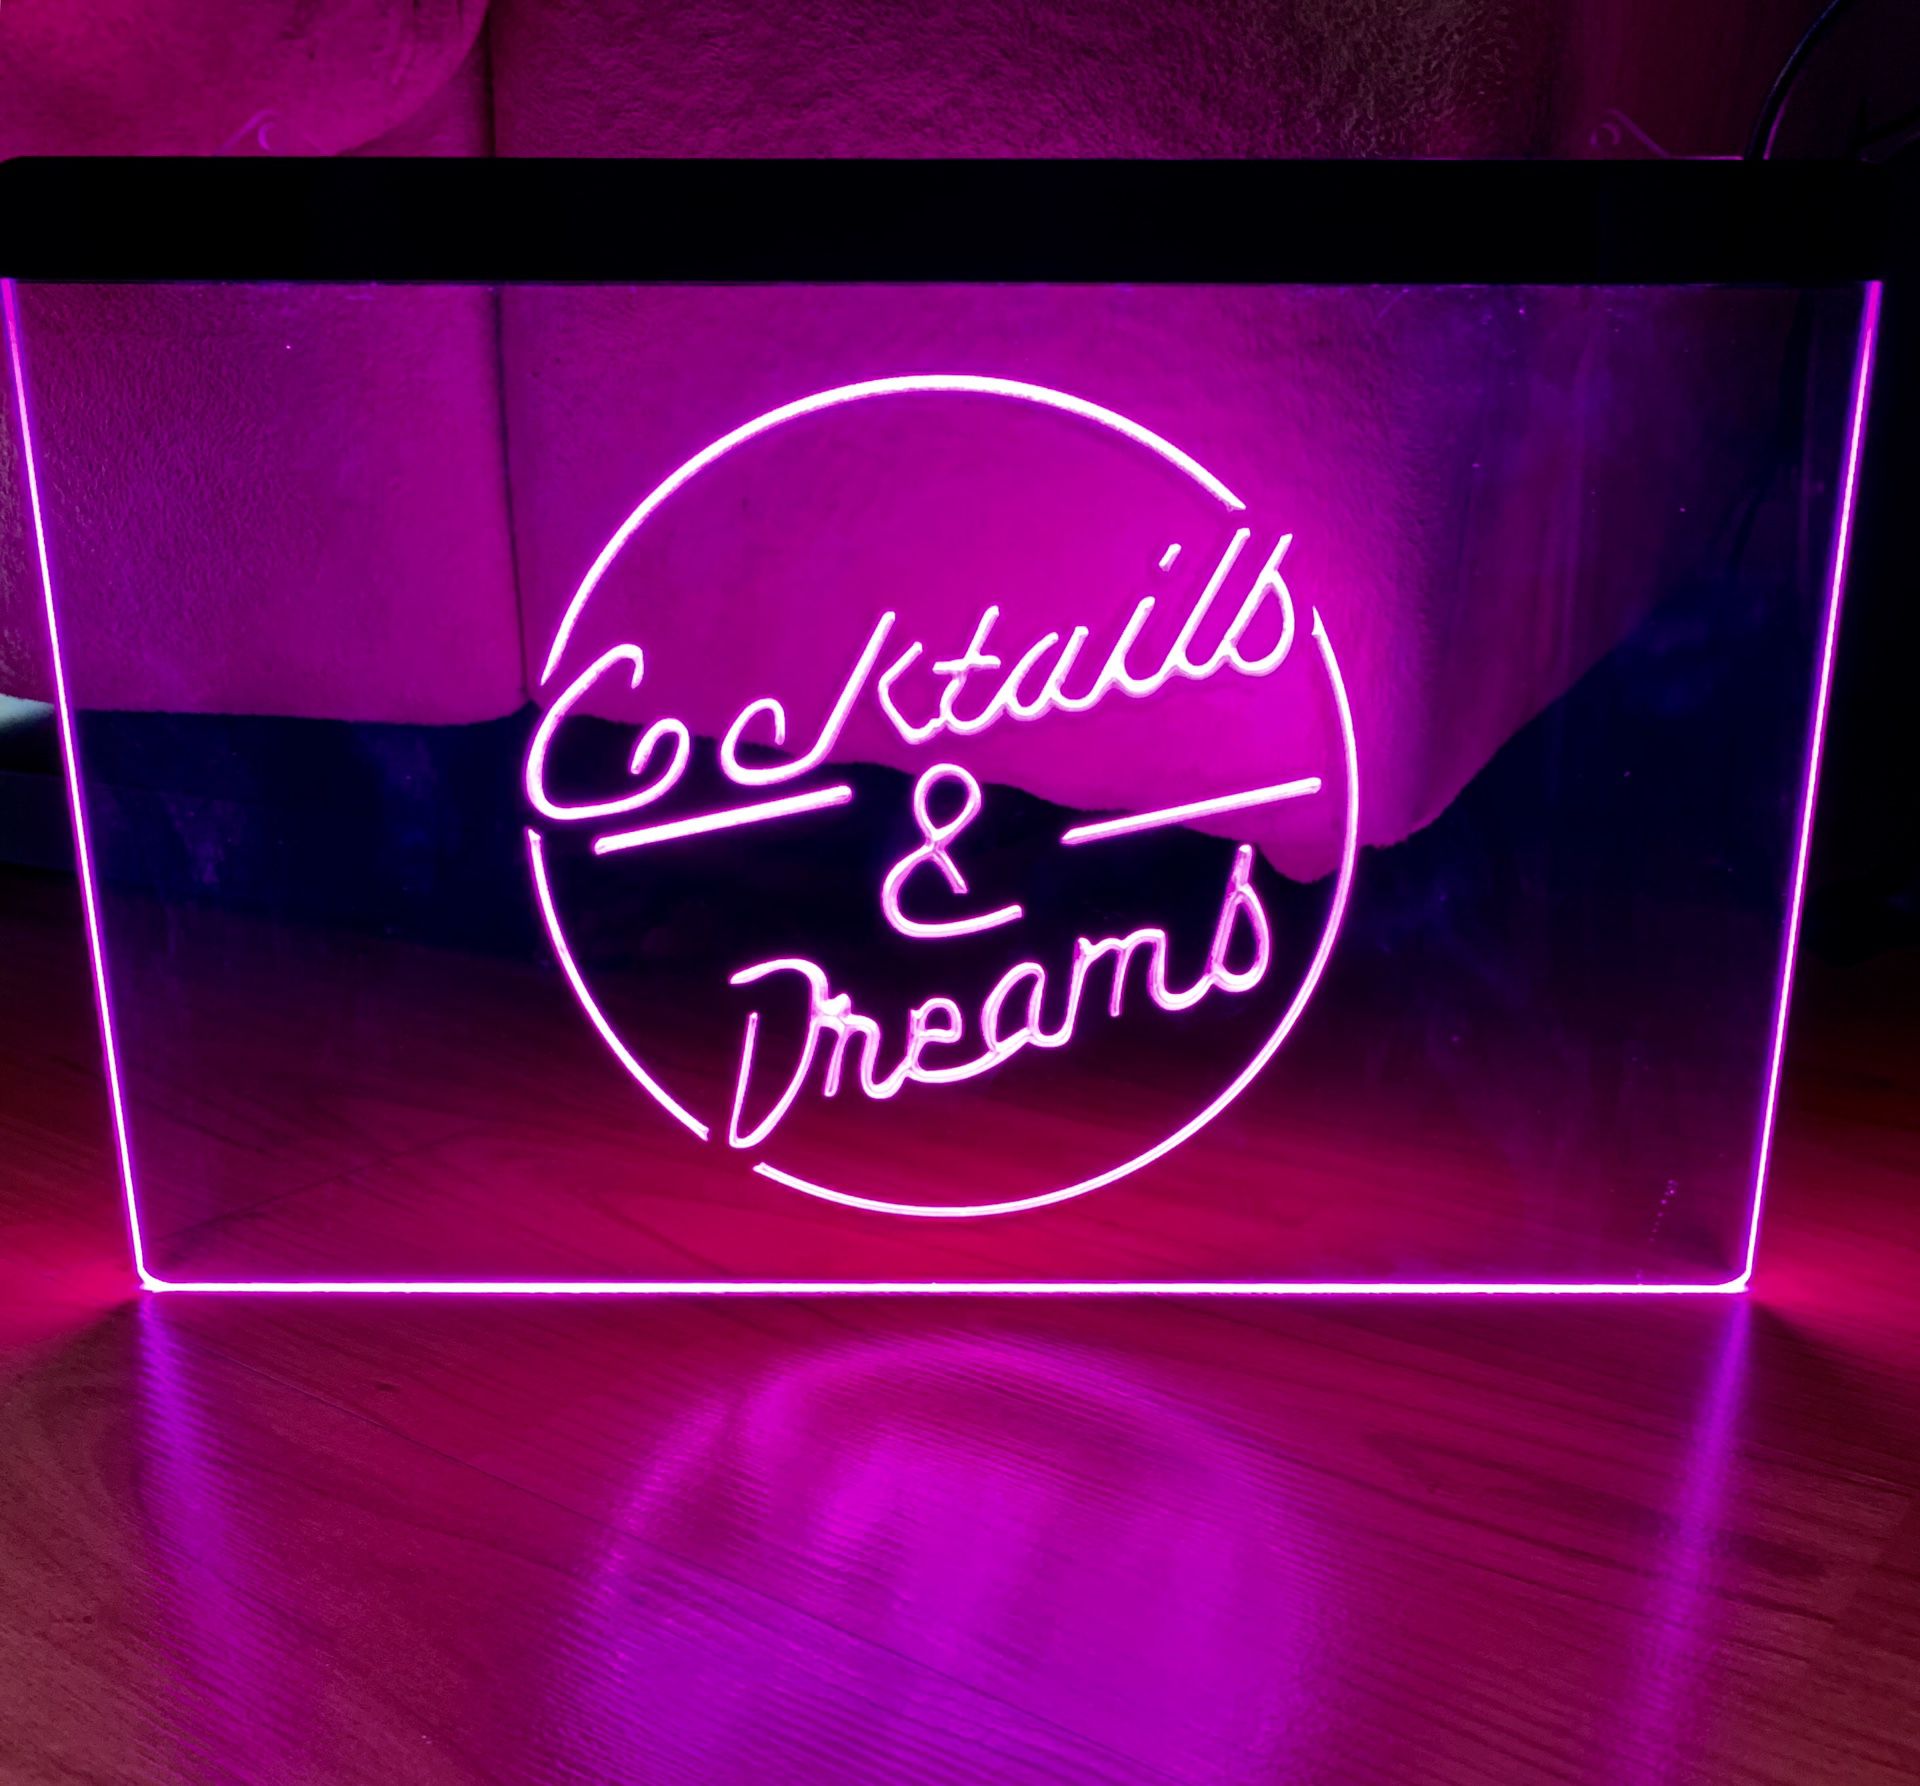 COCKTAILS AND DREAMS LED NEON PINK LIGHT SIGN 8x12